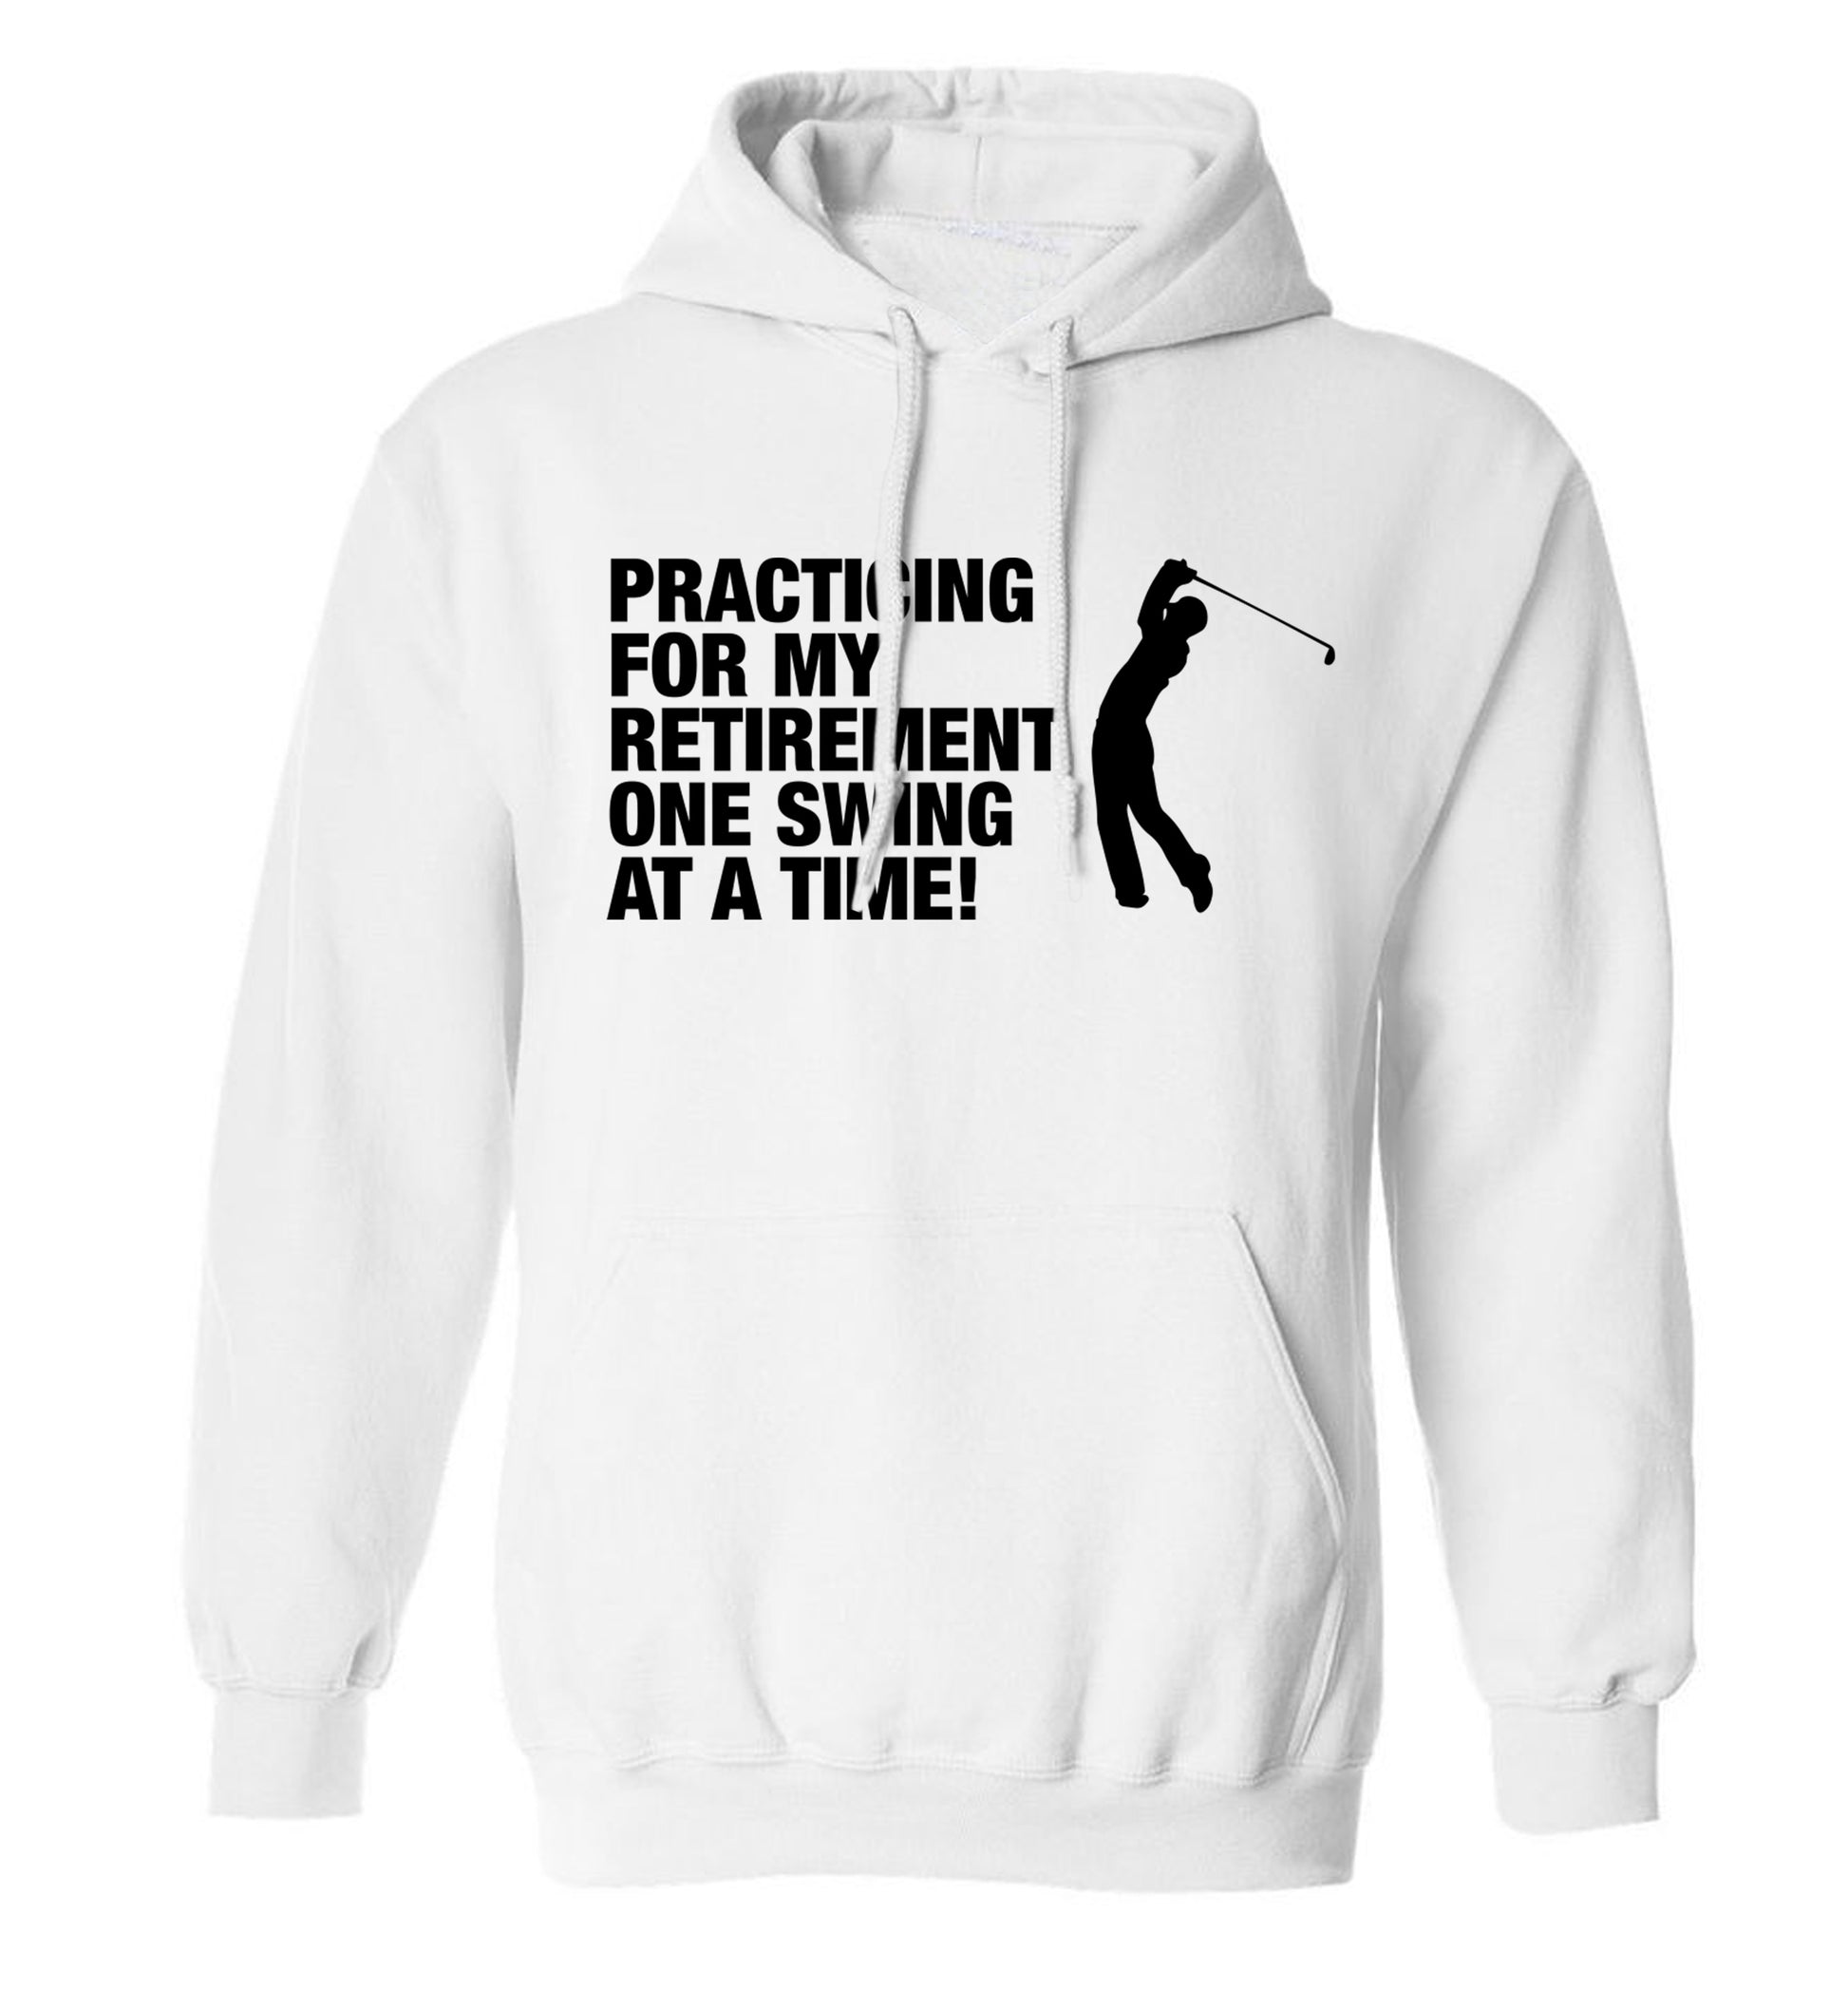 Practicing for my retirement one swing at a time adults unisex white hoodie 2XL